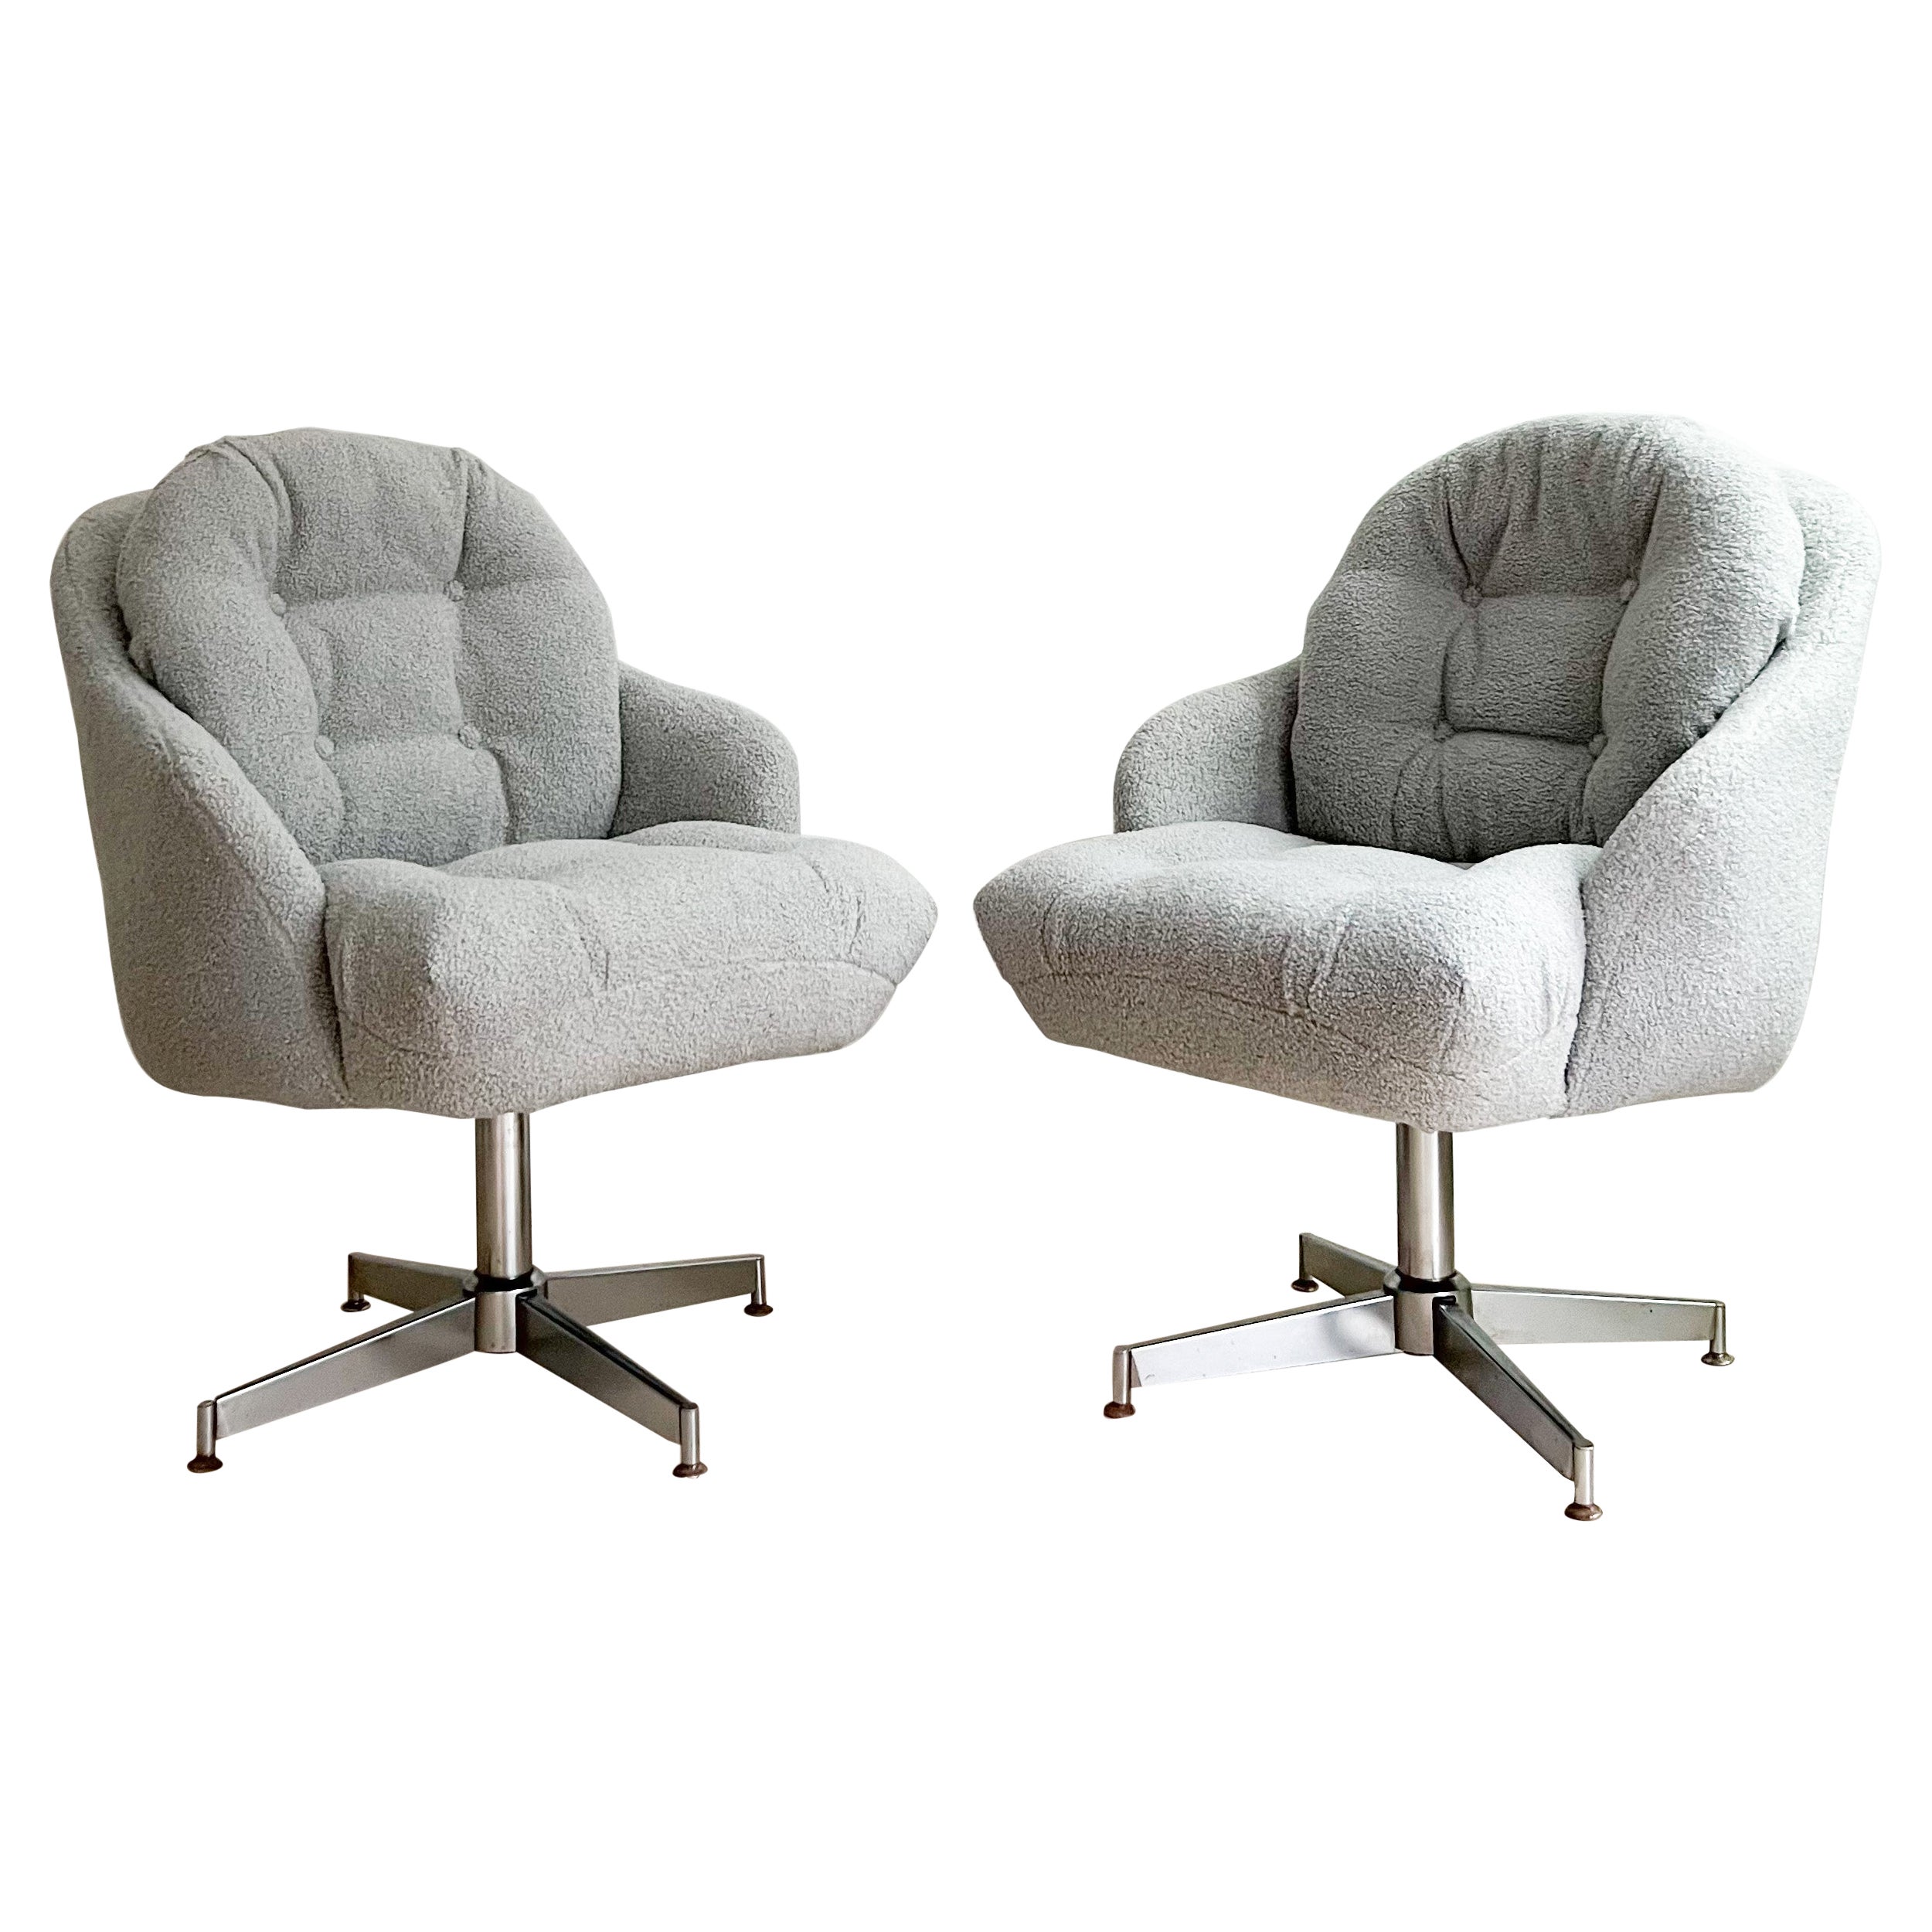 Pair of Vintage Swivel Lounge Chairs in Light Grey Shearling